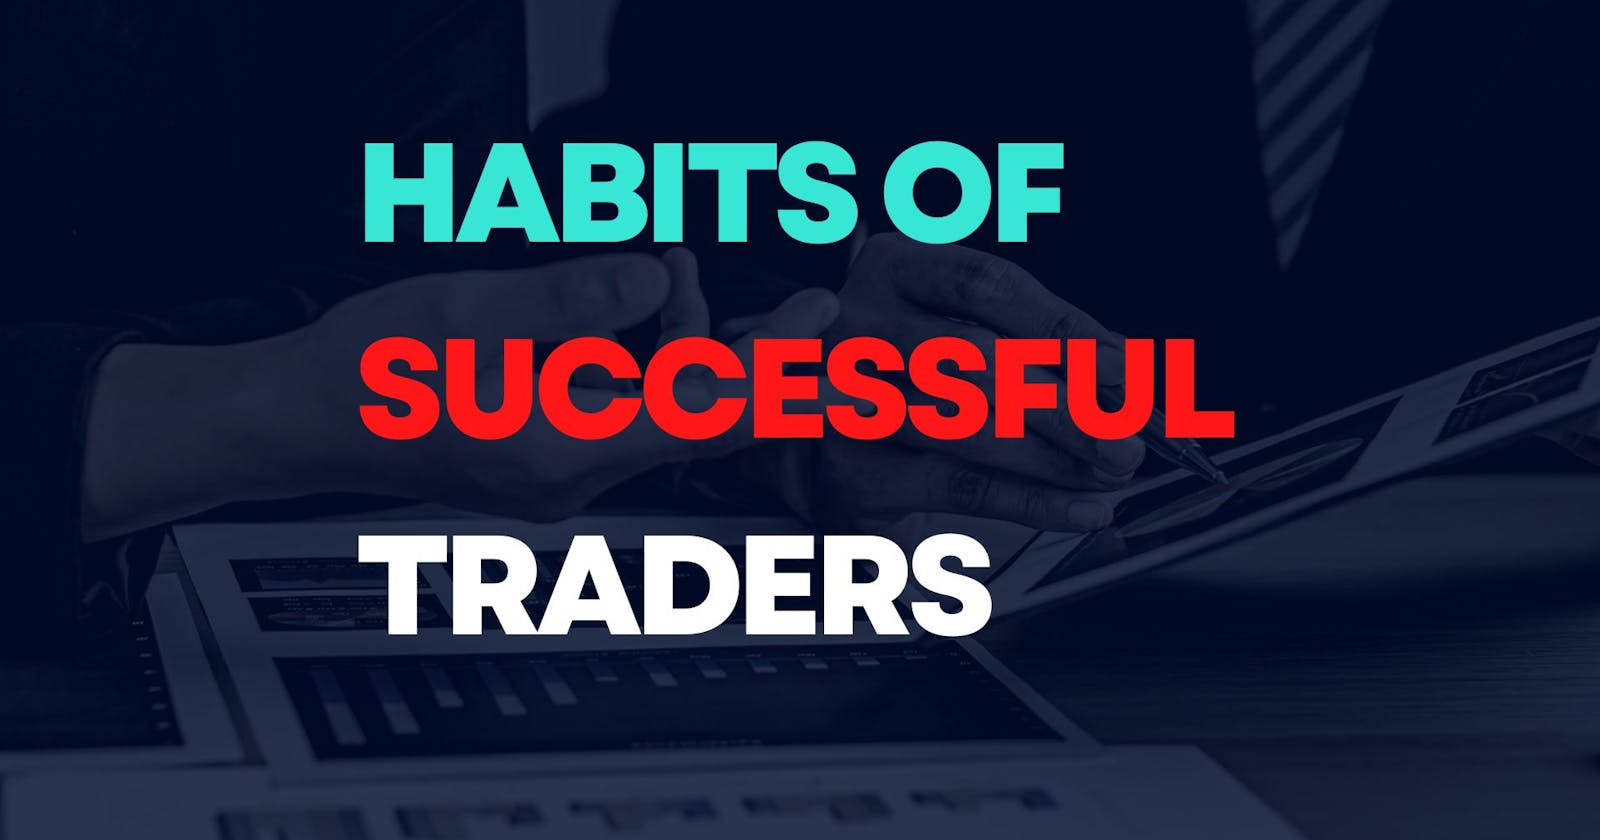 Habits of successful traders